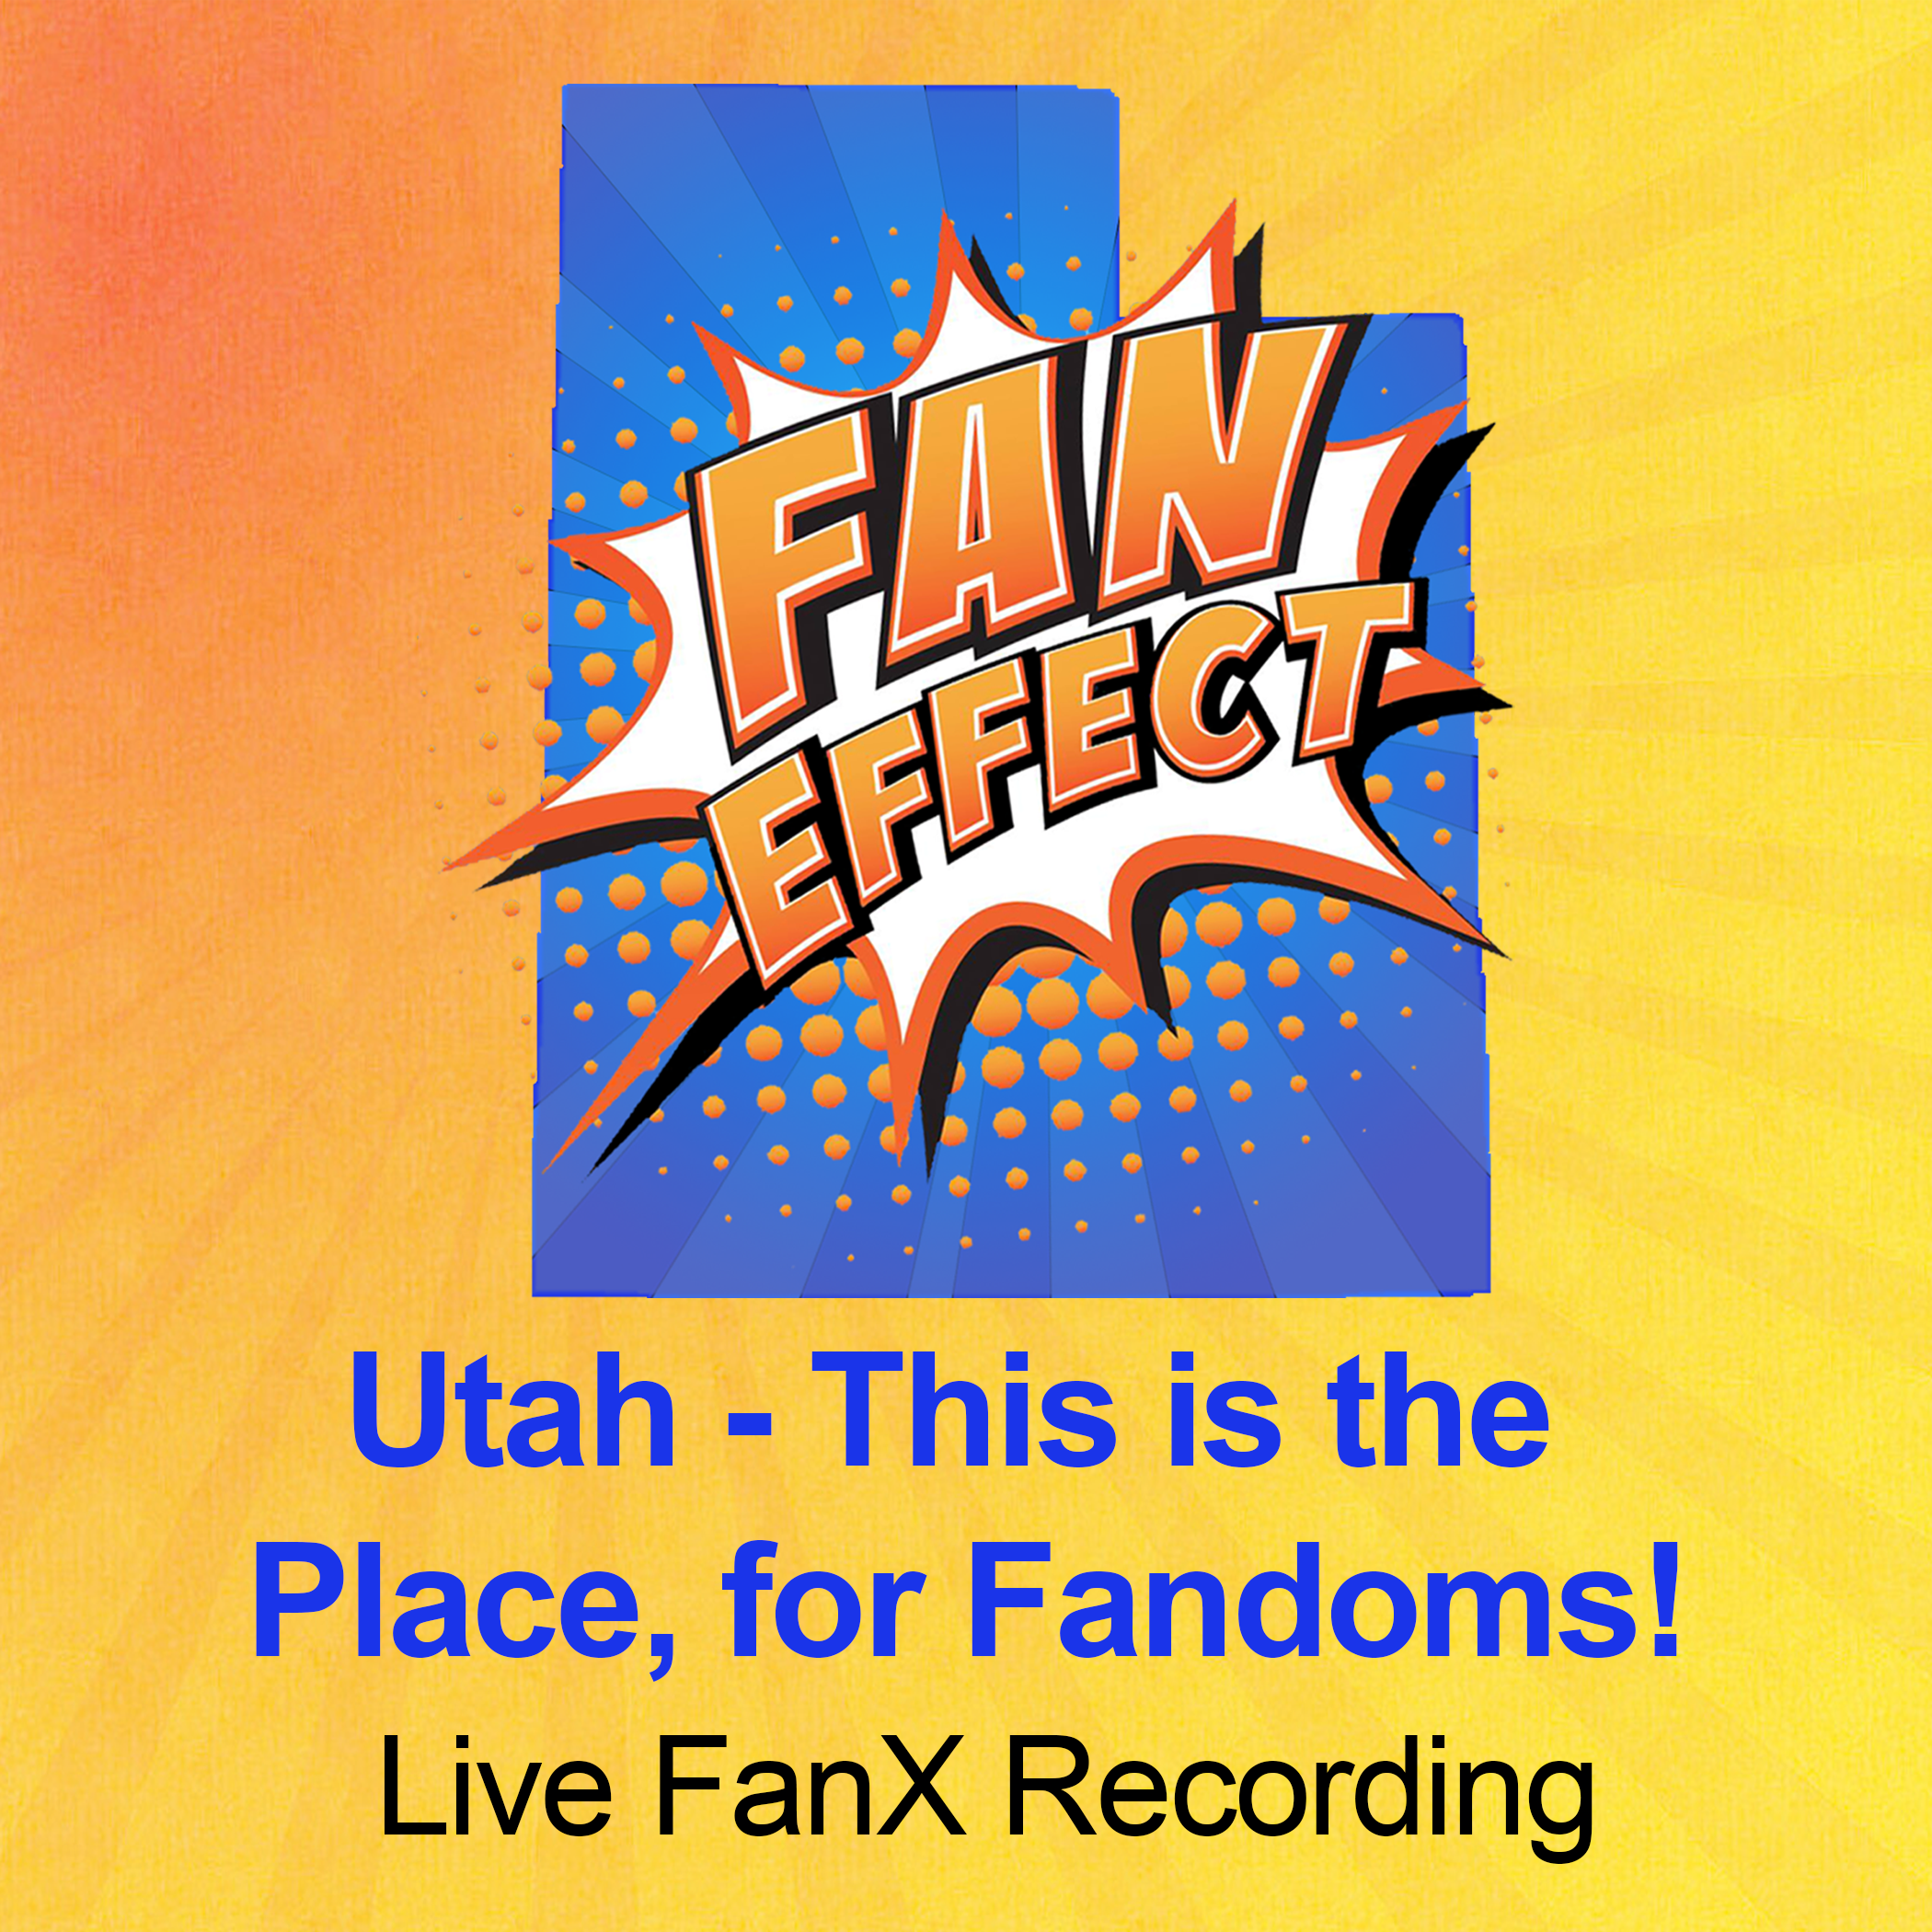 Utah - This is the Place, for Fandoms!: Live FanX 2021 Recording